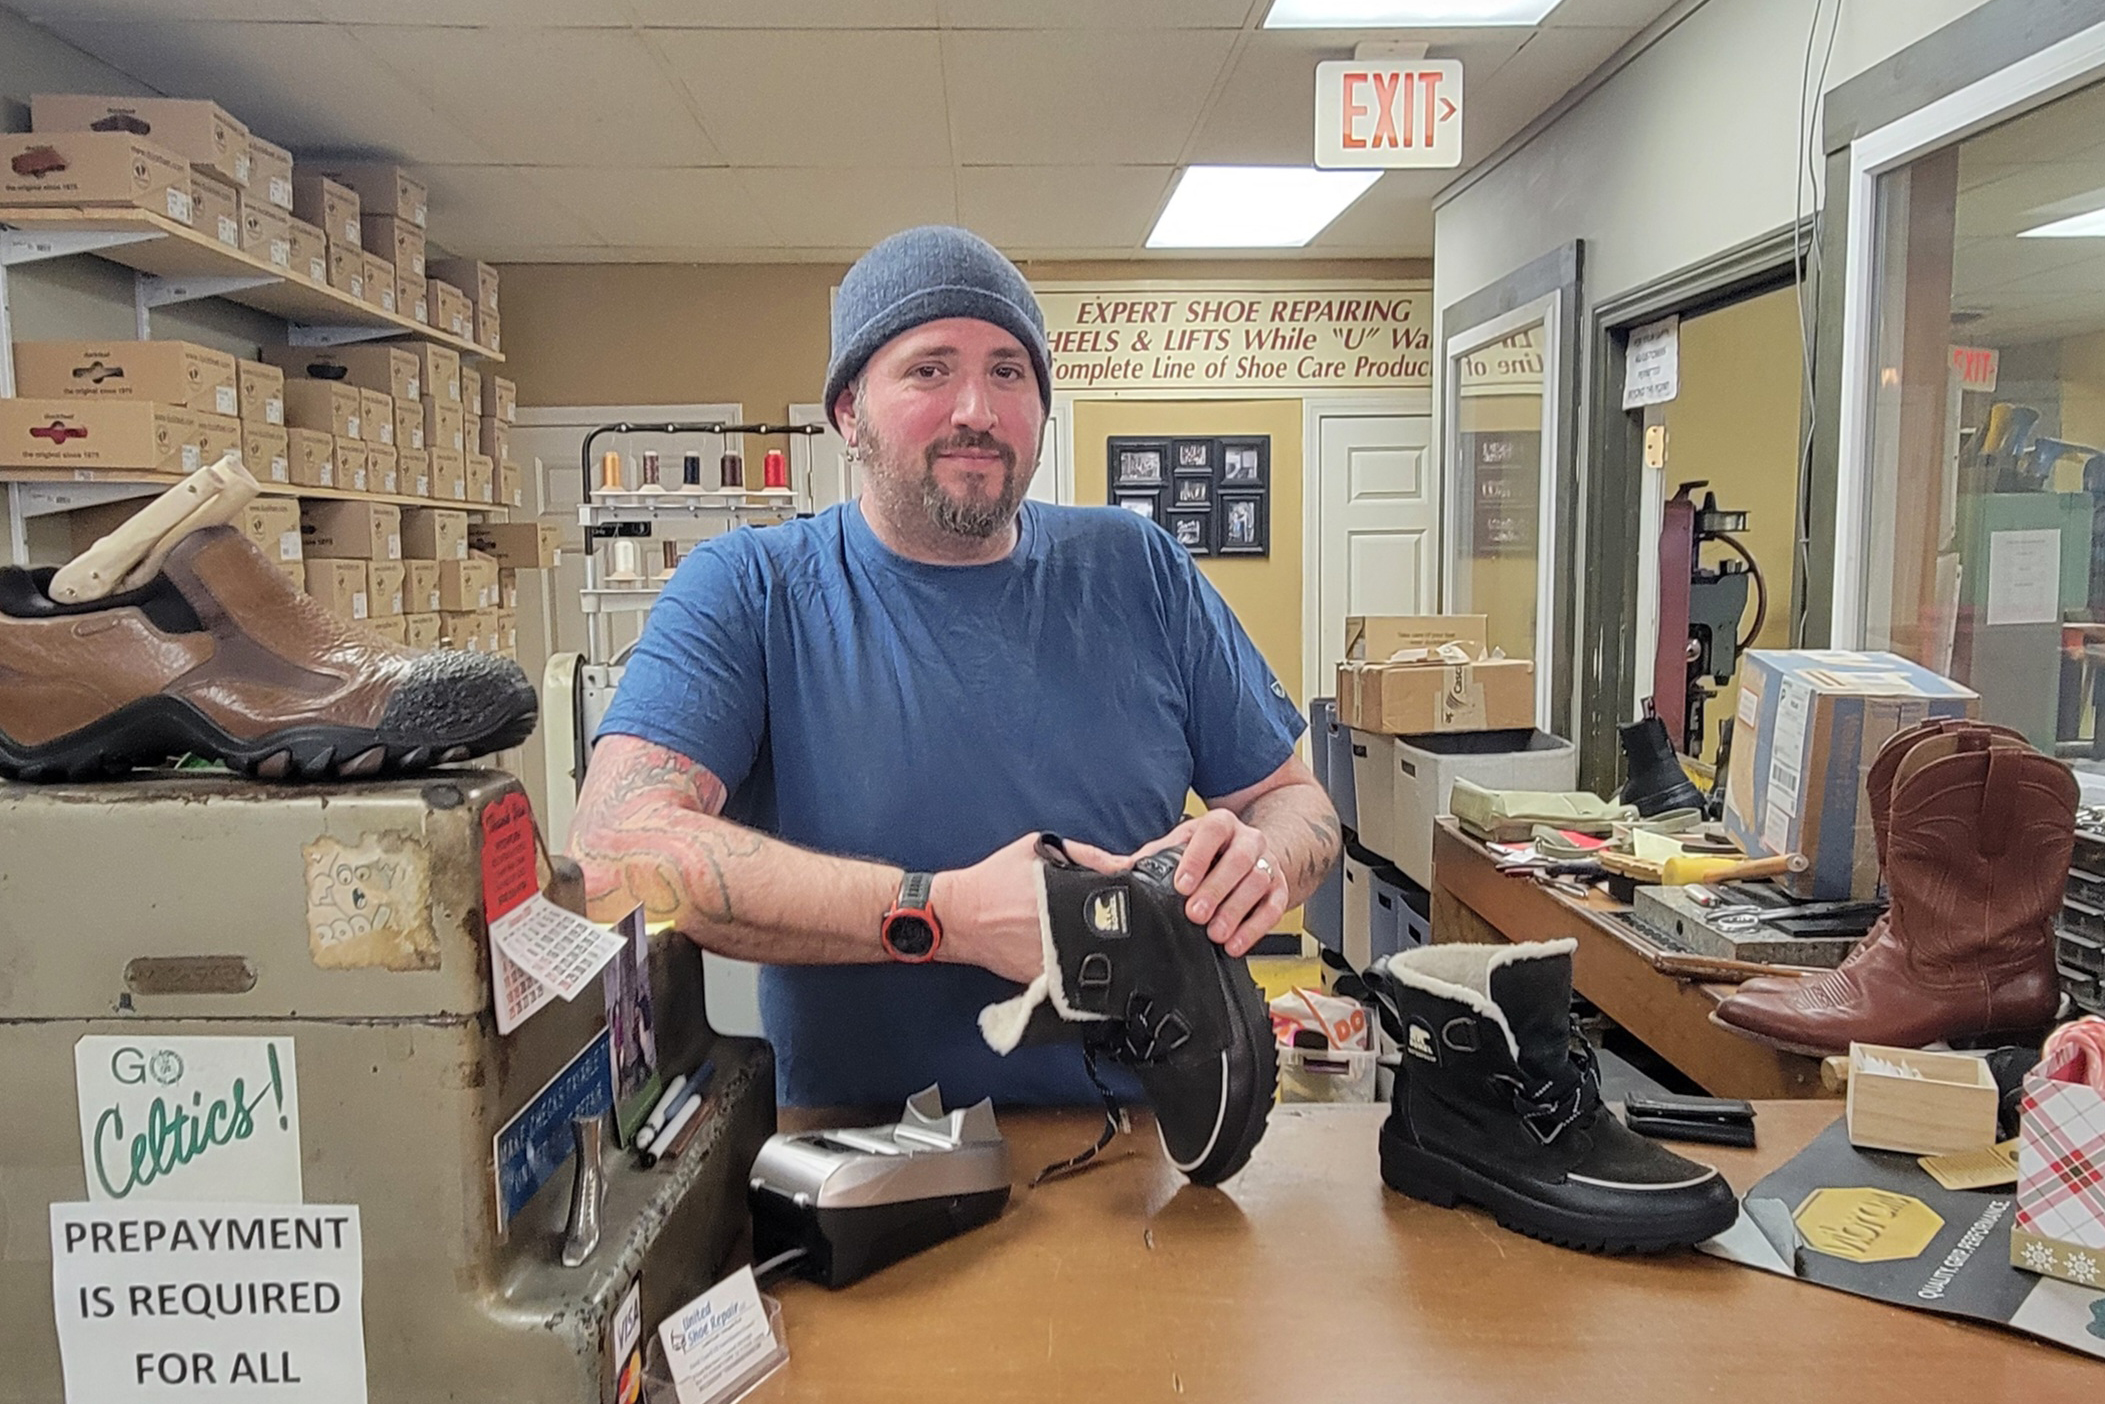 A man wearing a beanie holds a pair of shoes inside a shoe repair store